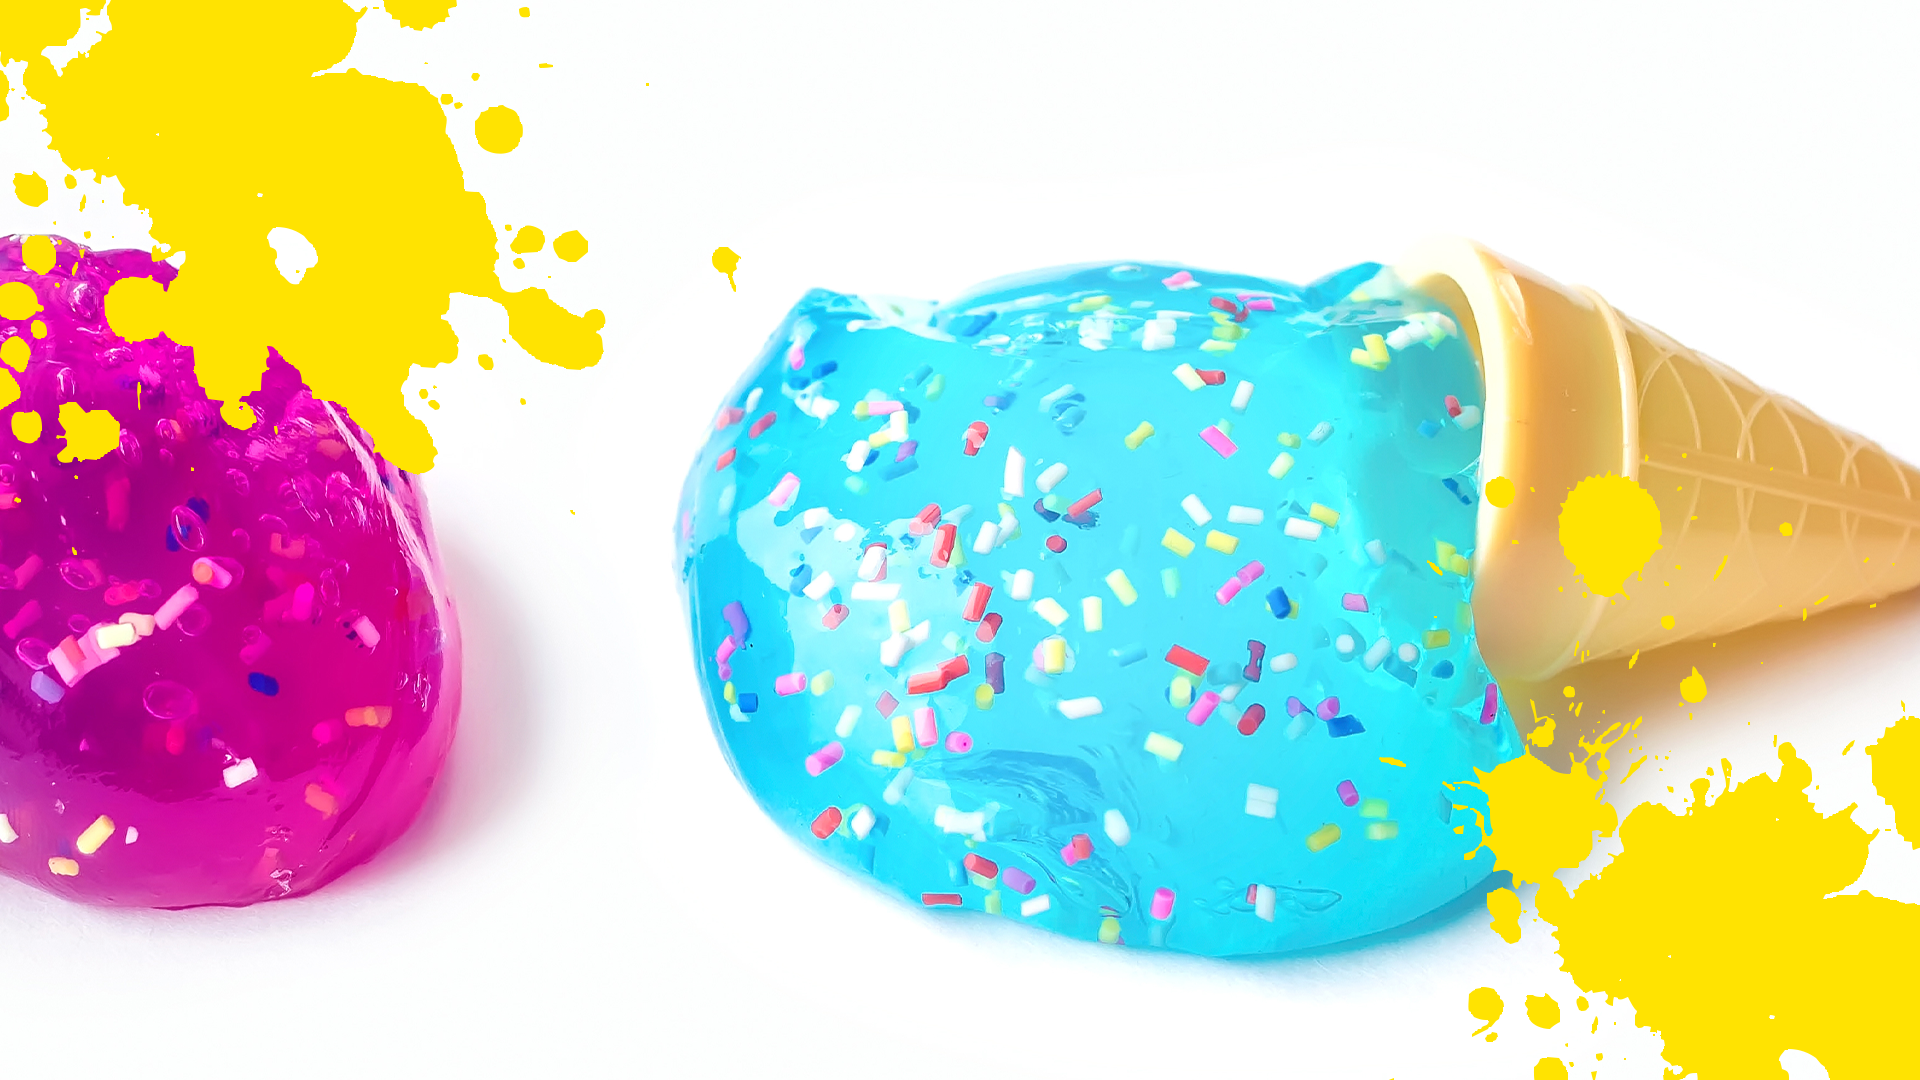 Slime in ice cream cones with splats